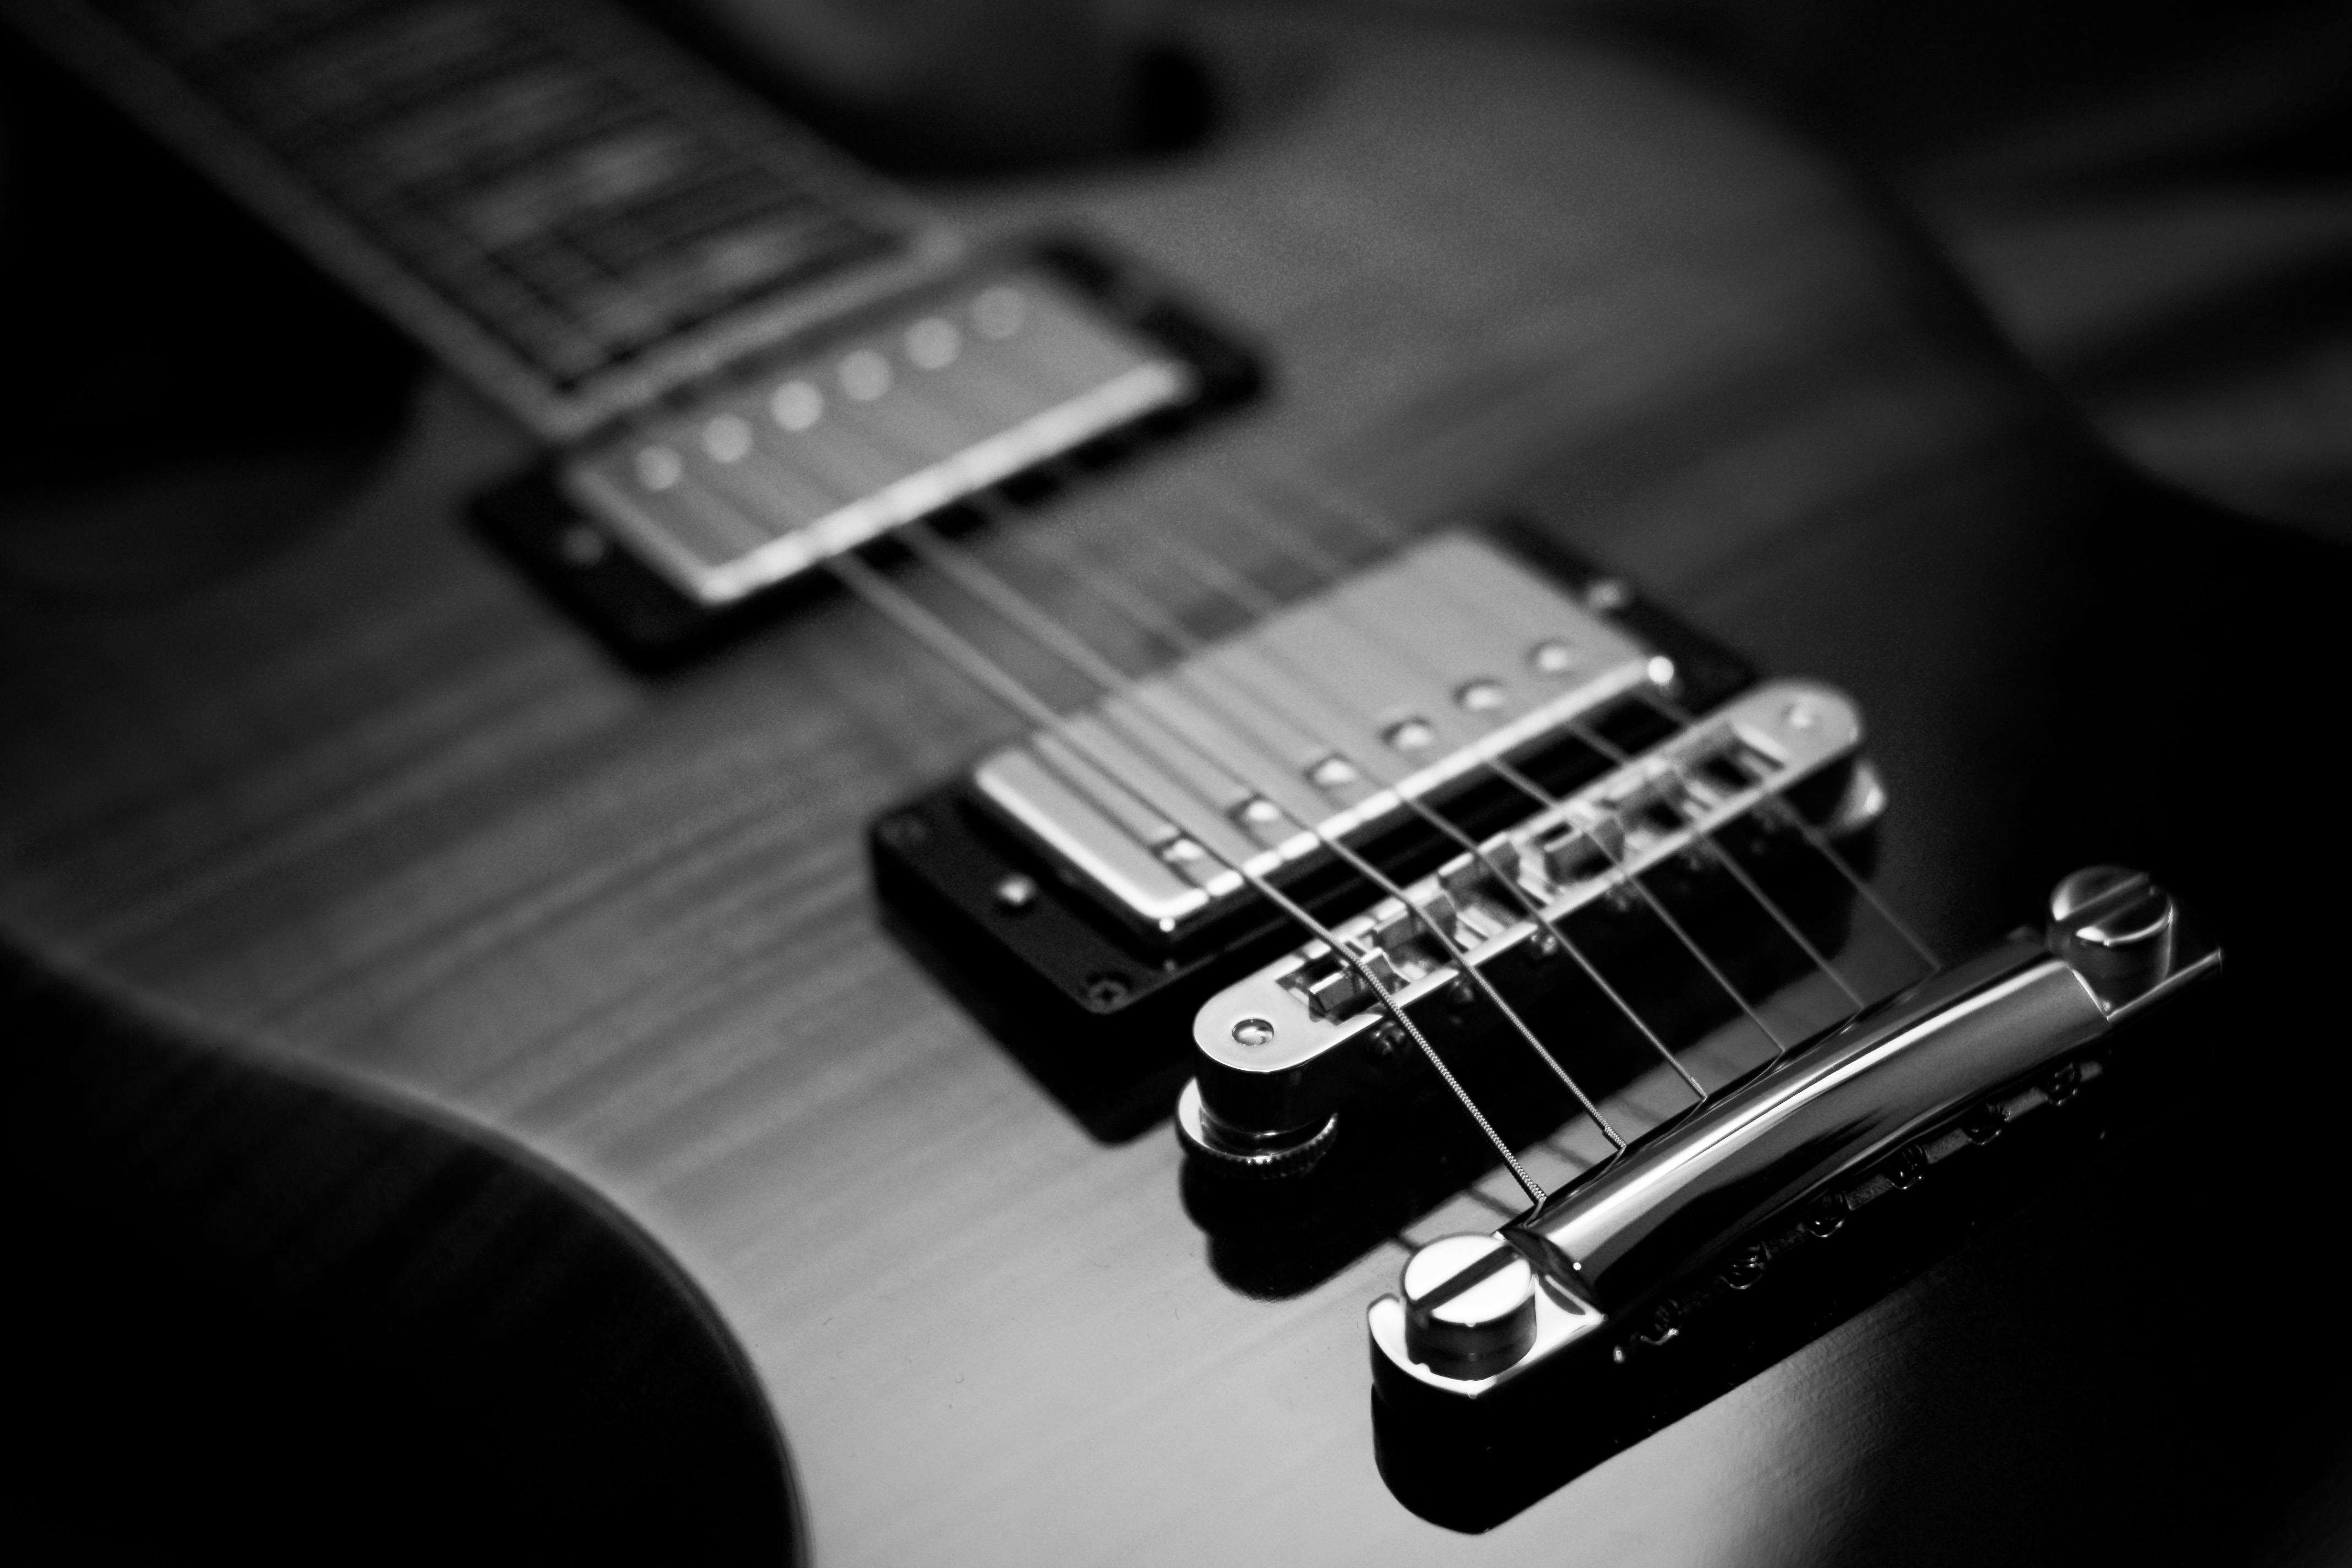 40+ 4K Guitar Wallpapers | Background Images